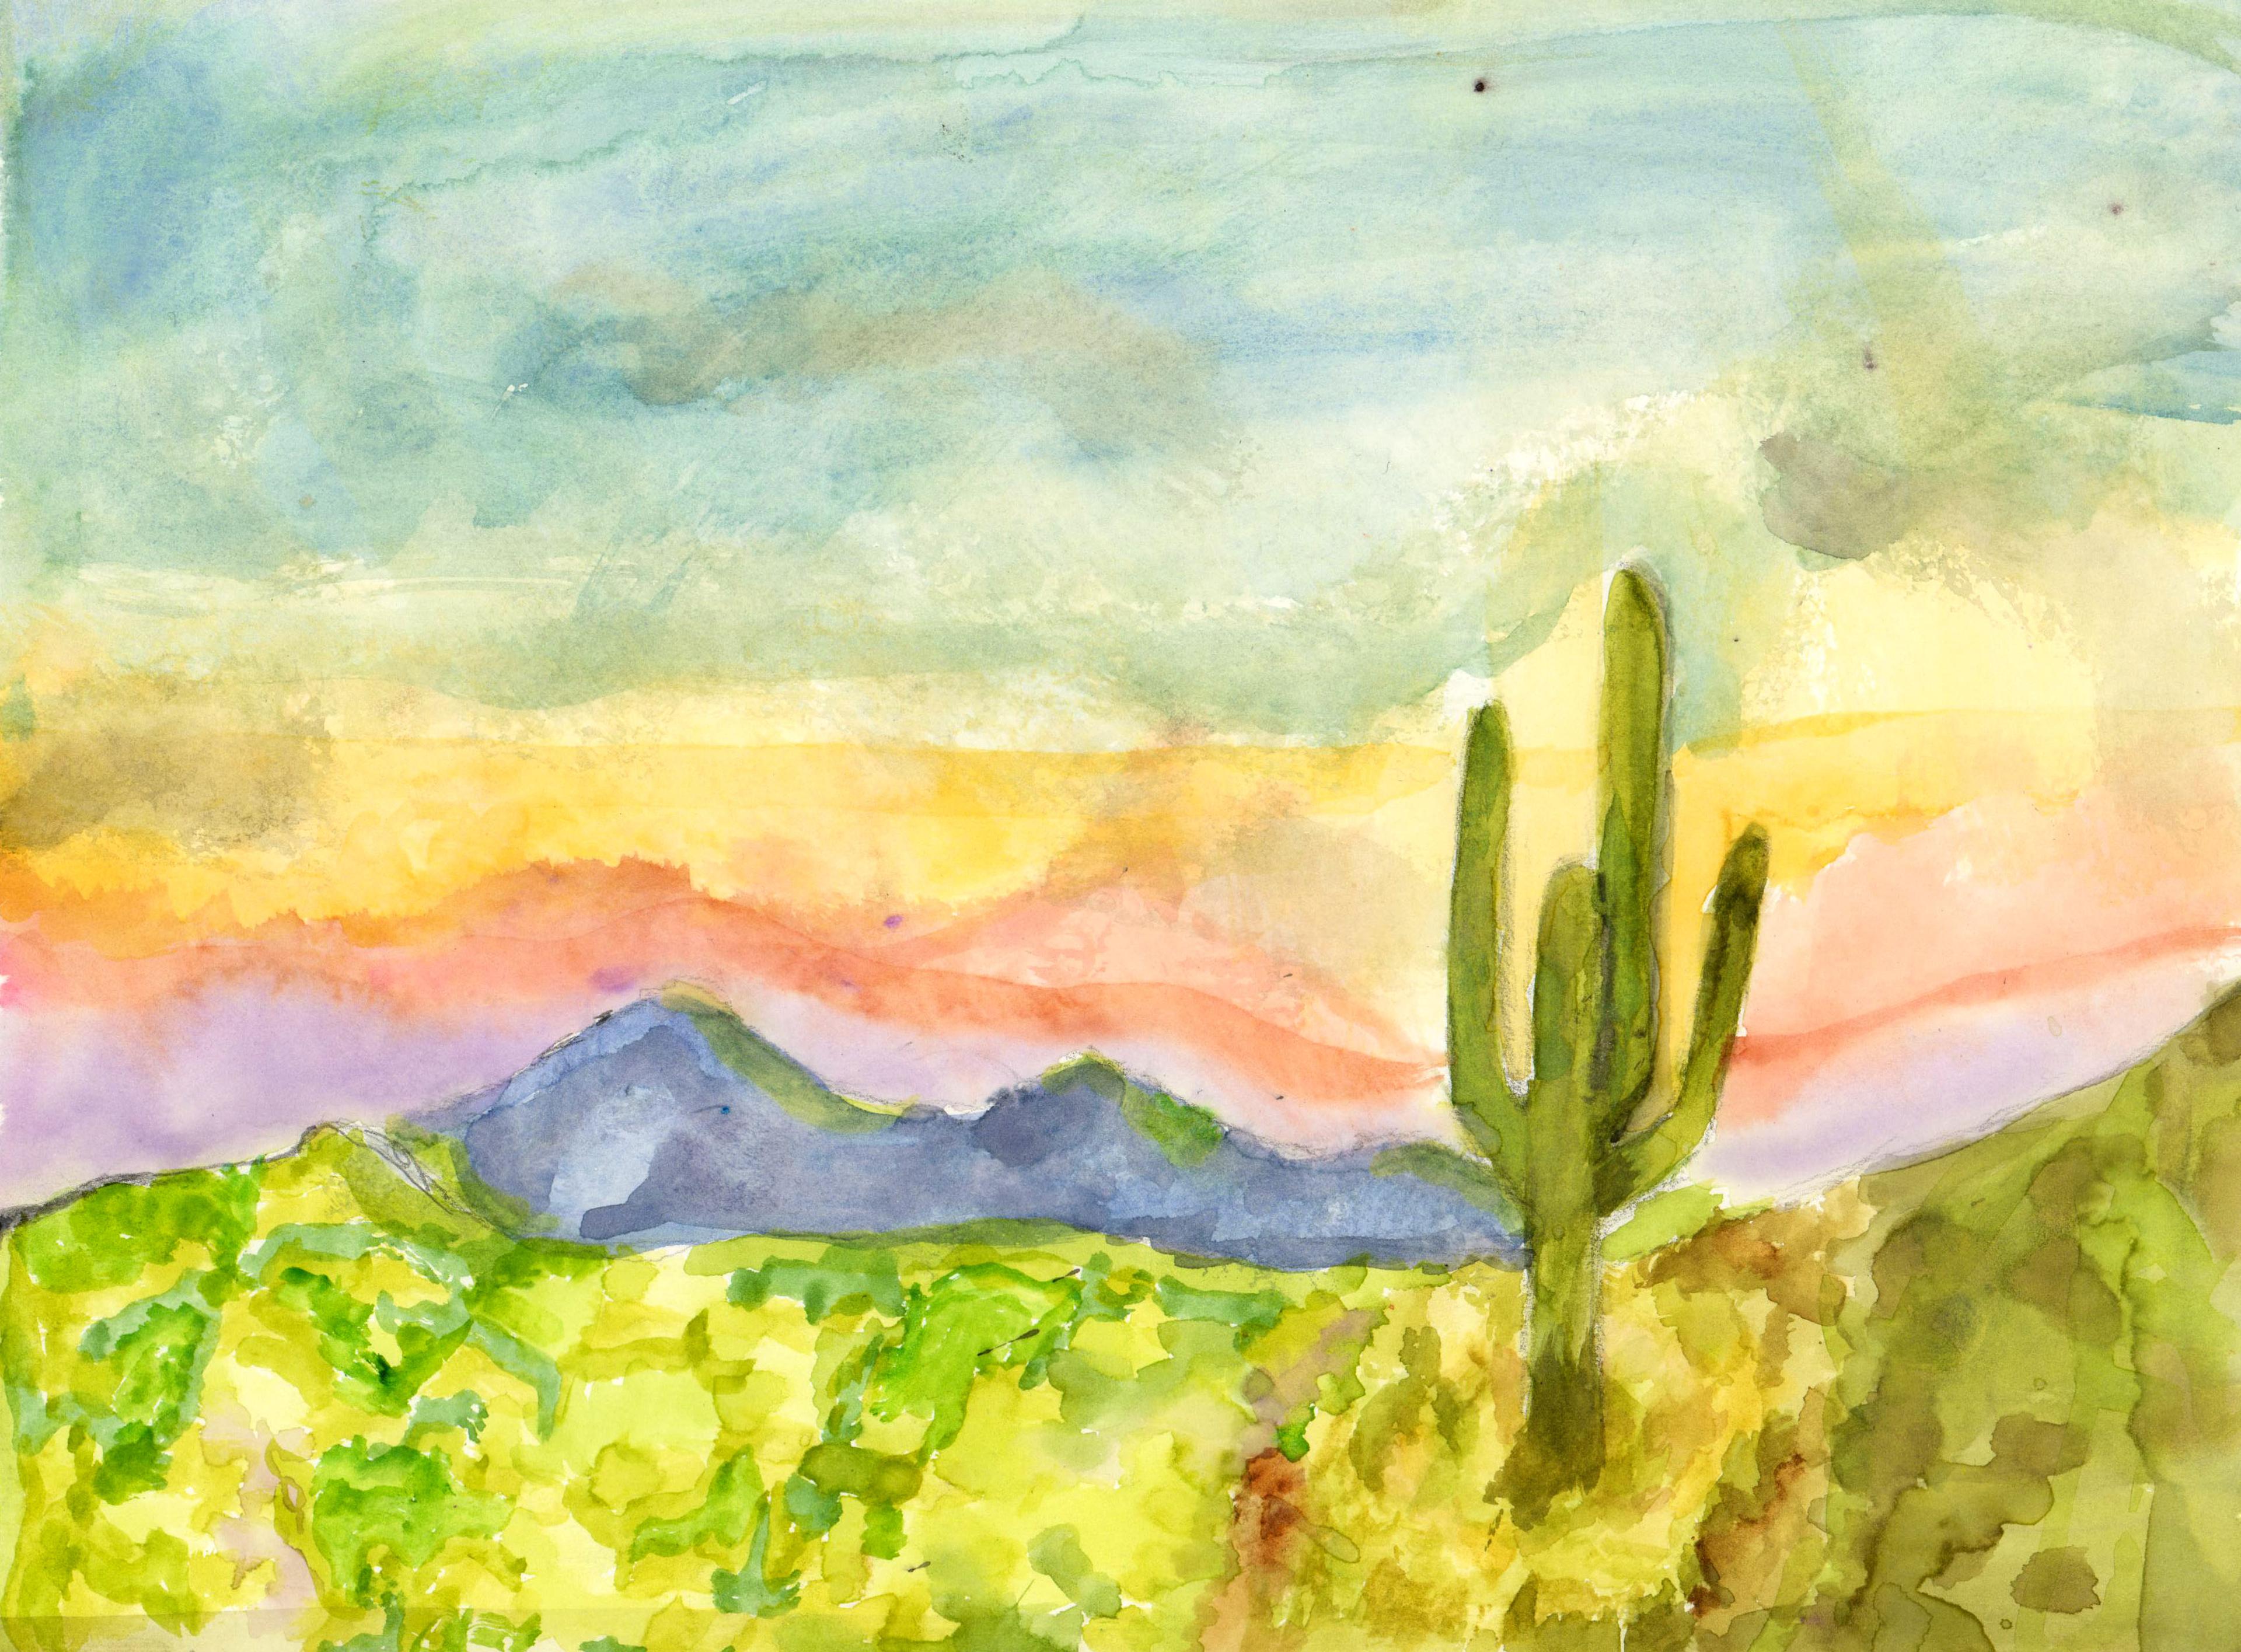 Watercolor painting of pale green cactus with four tall stems standing in a green field beneath a pale blue sky that shifts downward in hue to yellow, then red, above a distant blue mountain range on the horizon. The cactus appears in the foreground, just right of center in the image.